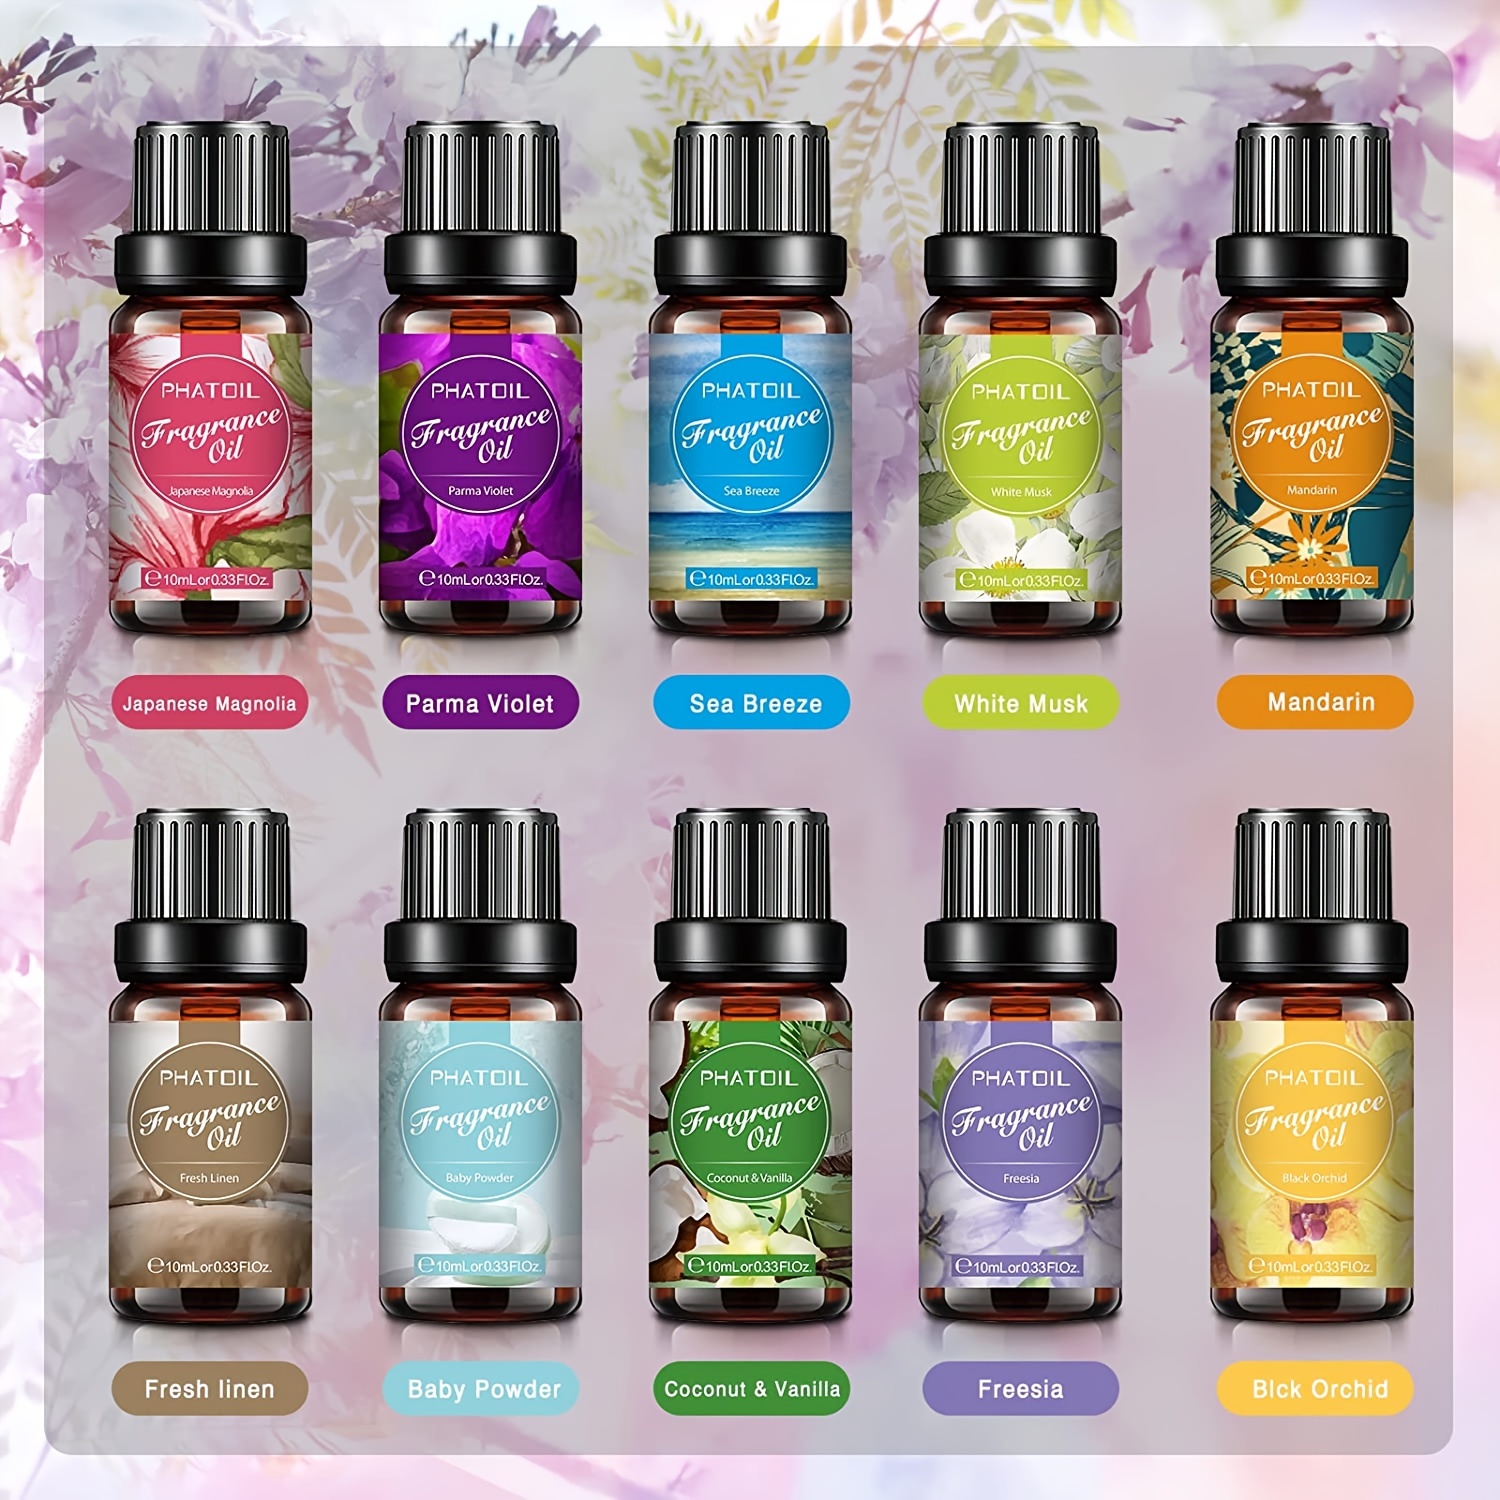 10pcs Fragrance Oils Gift Set - Premium Grade Scented Oil For Candle Making, Diffuser - Fantastic Gift For Any Occasion